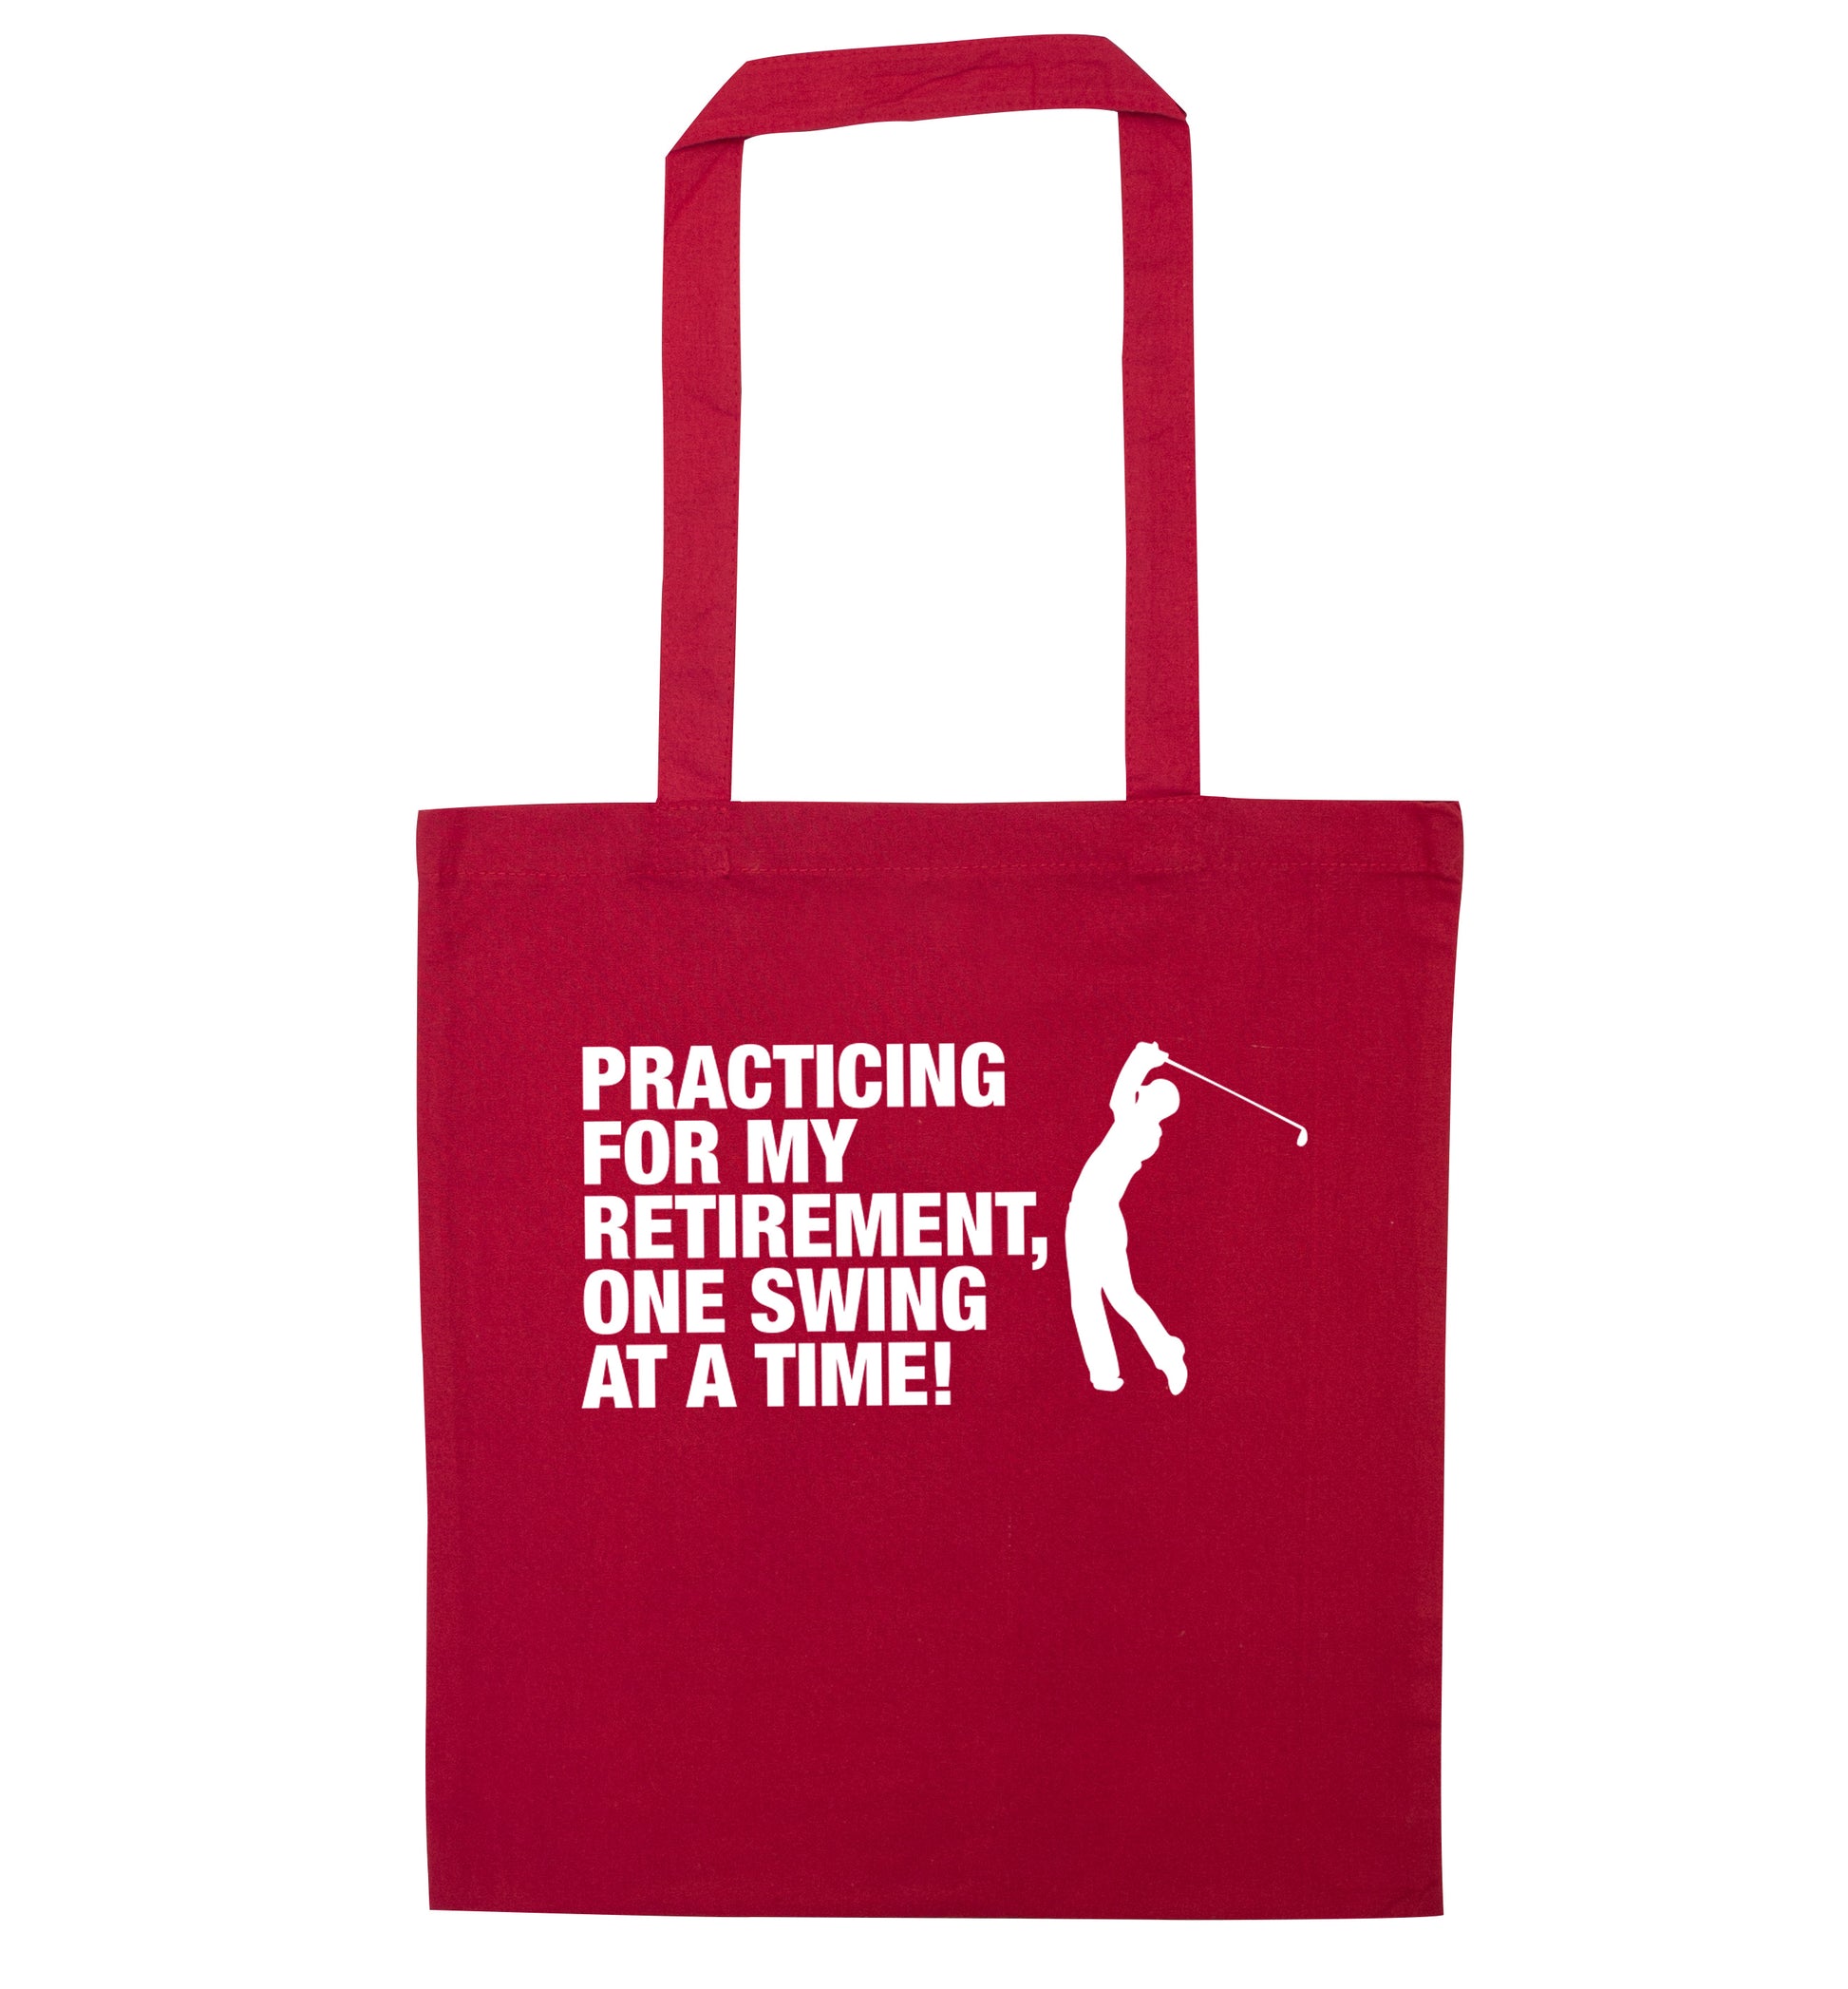 Practicing for my retirement one swing at a time red tote bag